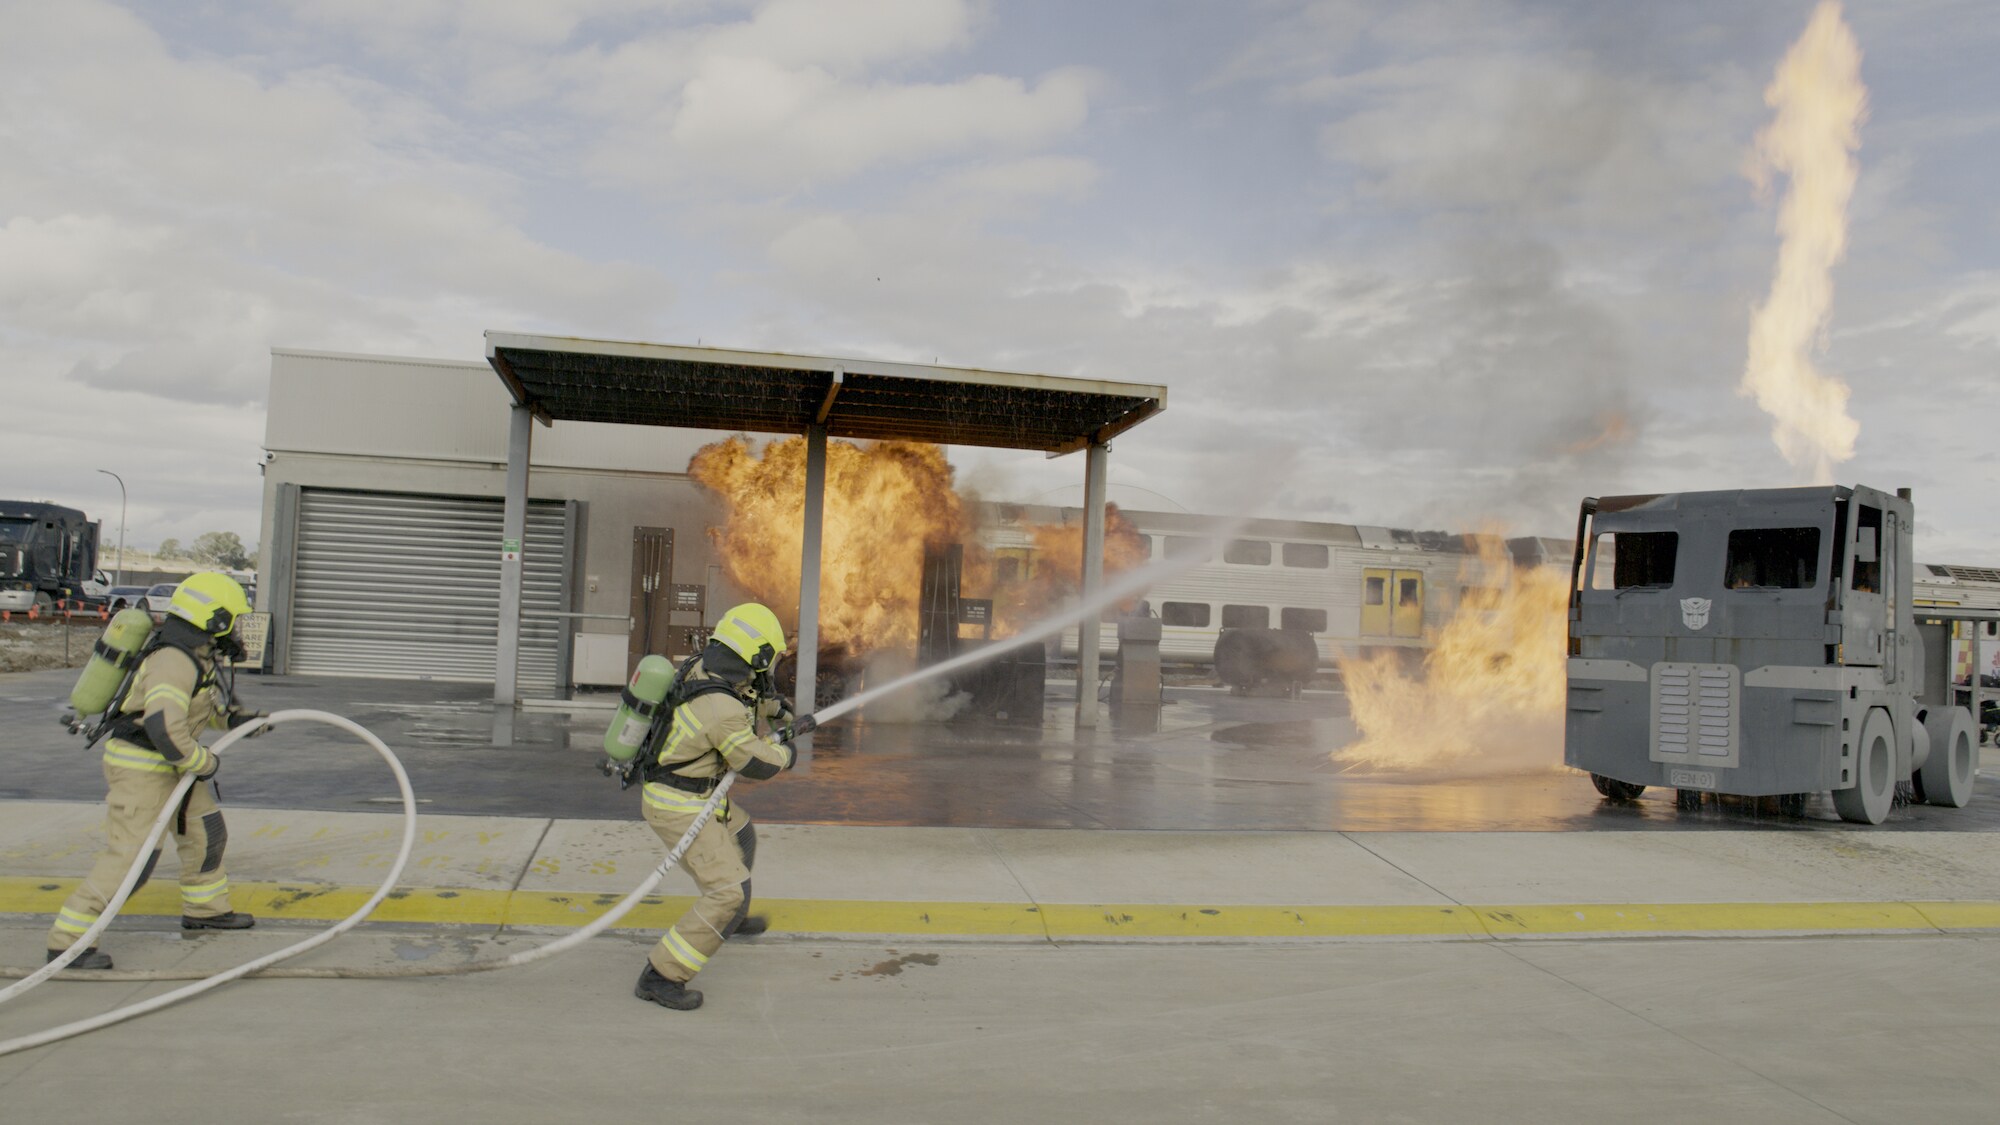 New South Wales Firefighters put out a fire outside during a training exercise. (National Geographic for Disney+)